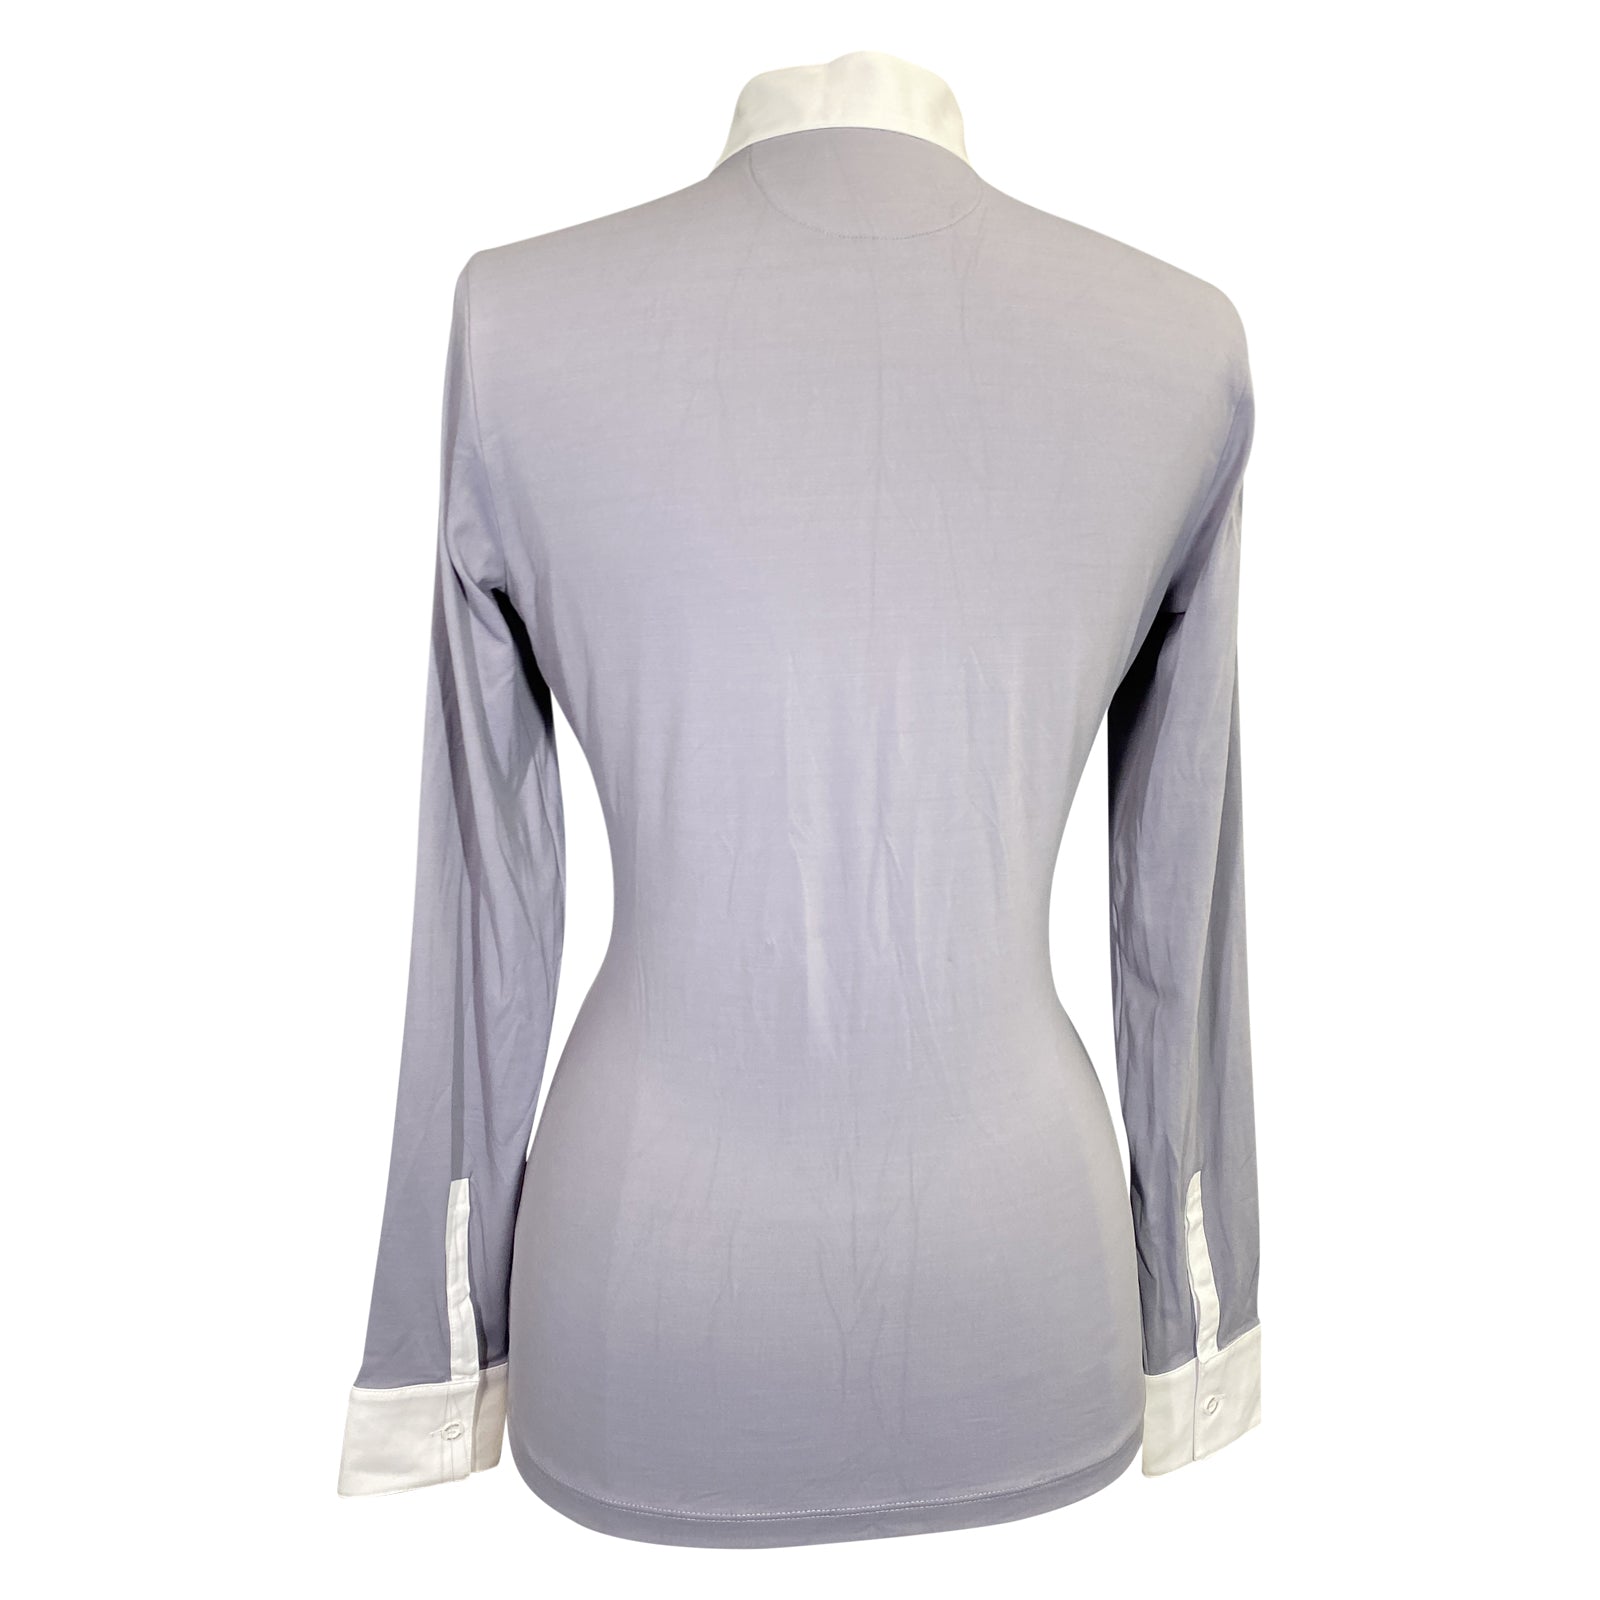 Back of Equiline 'Cabec' Show Shirt in Graffiti Grey - Women's IT 40/US 6